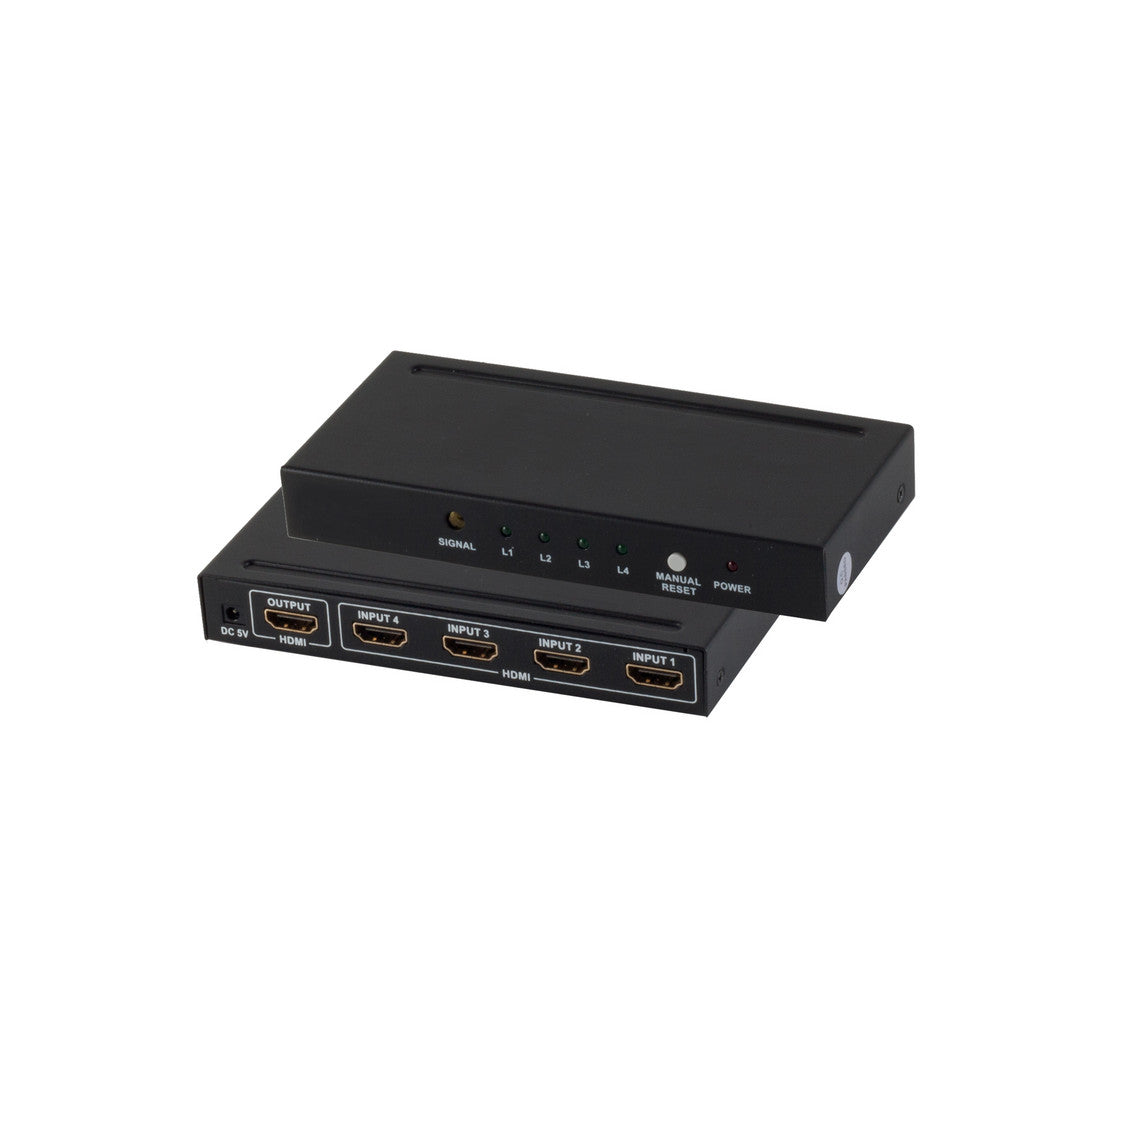 HDMI Switch, 4x IN 1x OUT, 4K2K, 3D, VER1.4